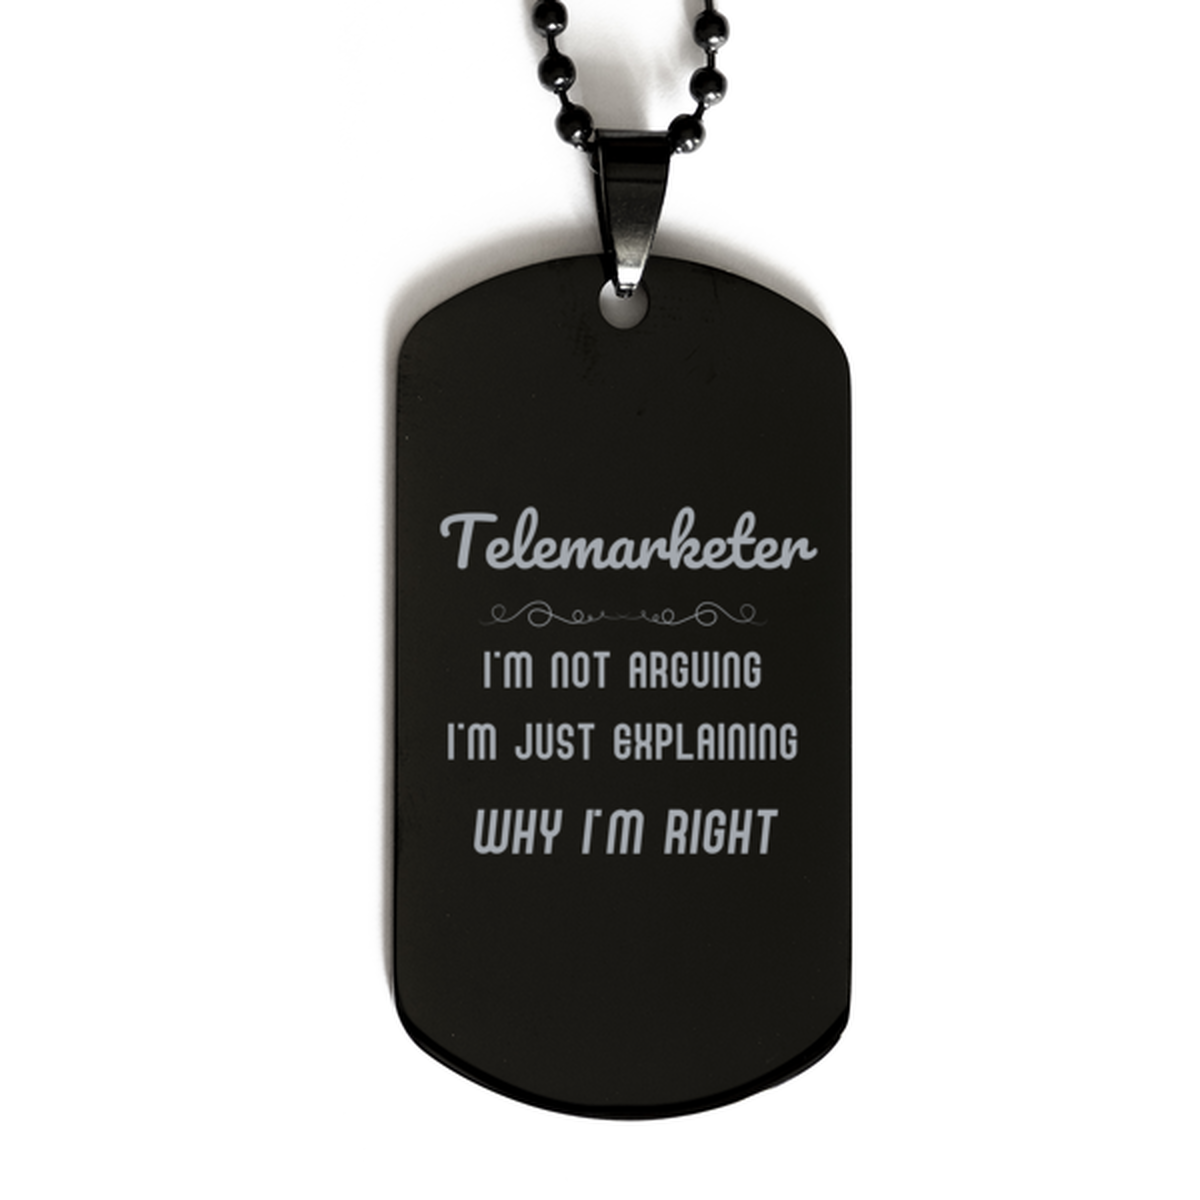 Telemarketer I'm not Arguing. I'm Just Explaining Why I'm RIGHT Black Dog Tag, Funny Saying Quote Telemarketer Gifts For Telemarketer Graduation Birthday Christmas Gifts for Men Women Coworker